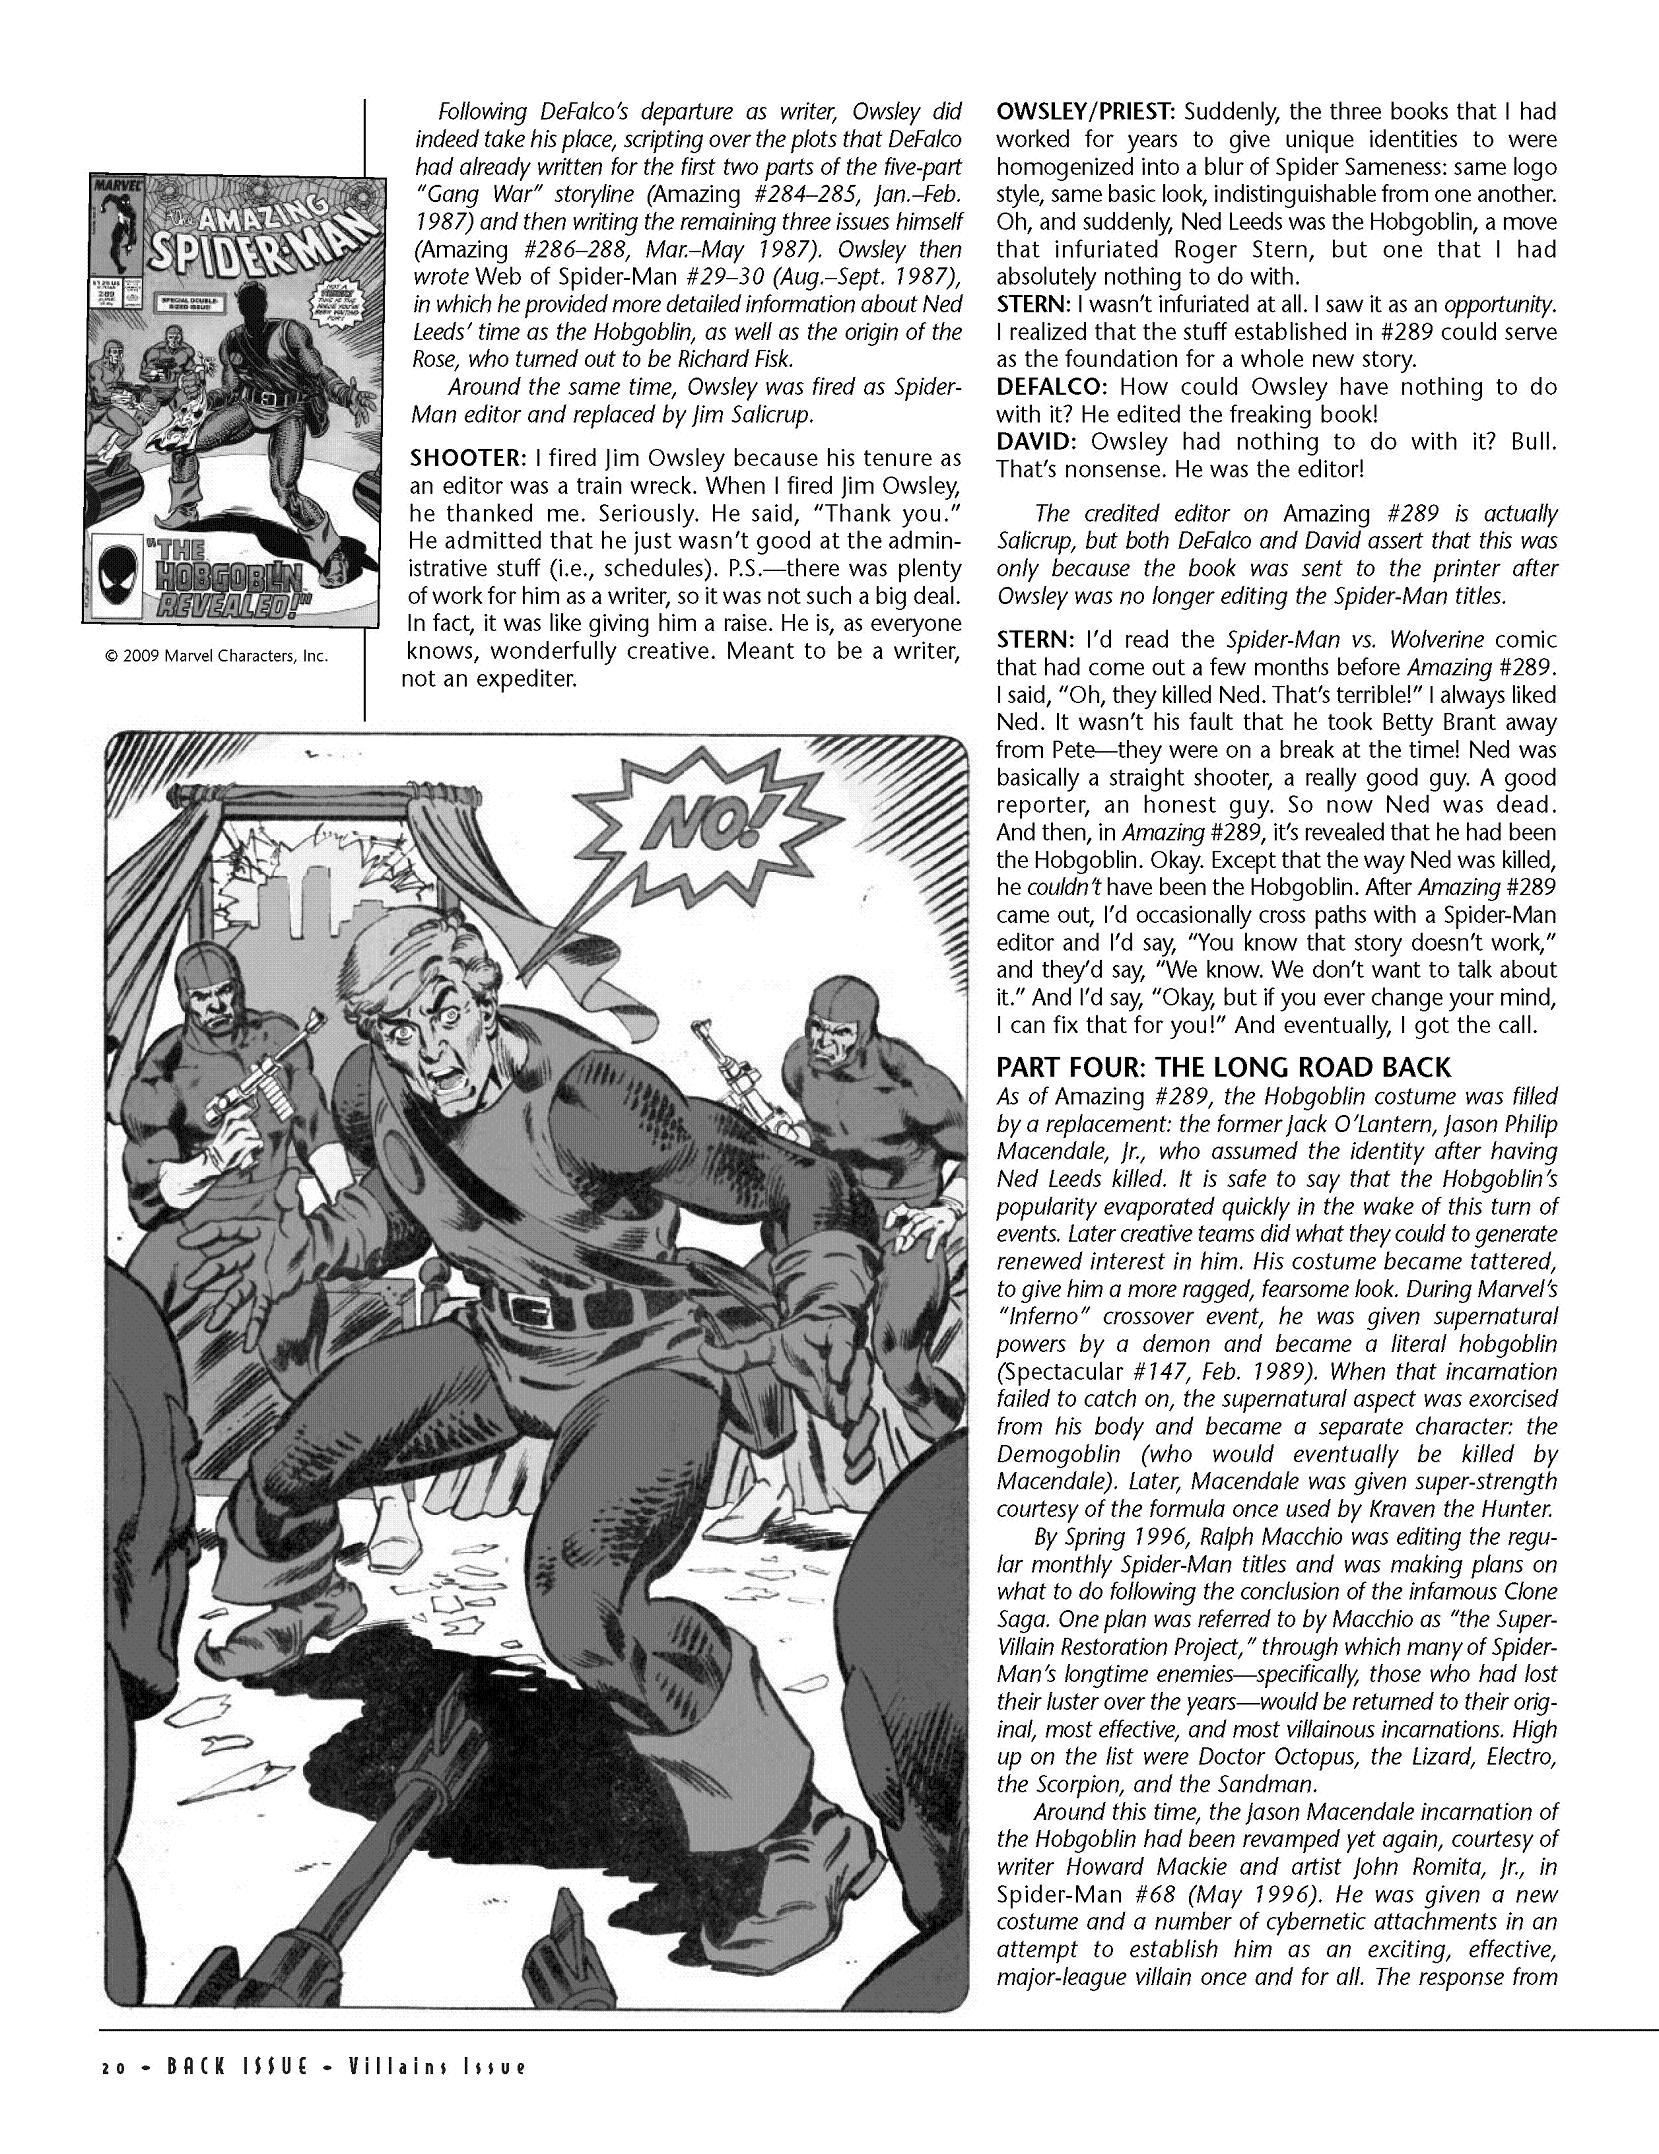 Read online Back Issue comic -  Issue #35 - 22